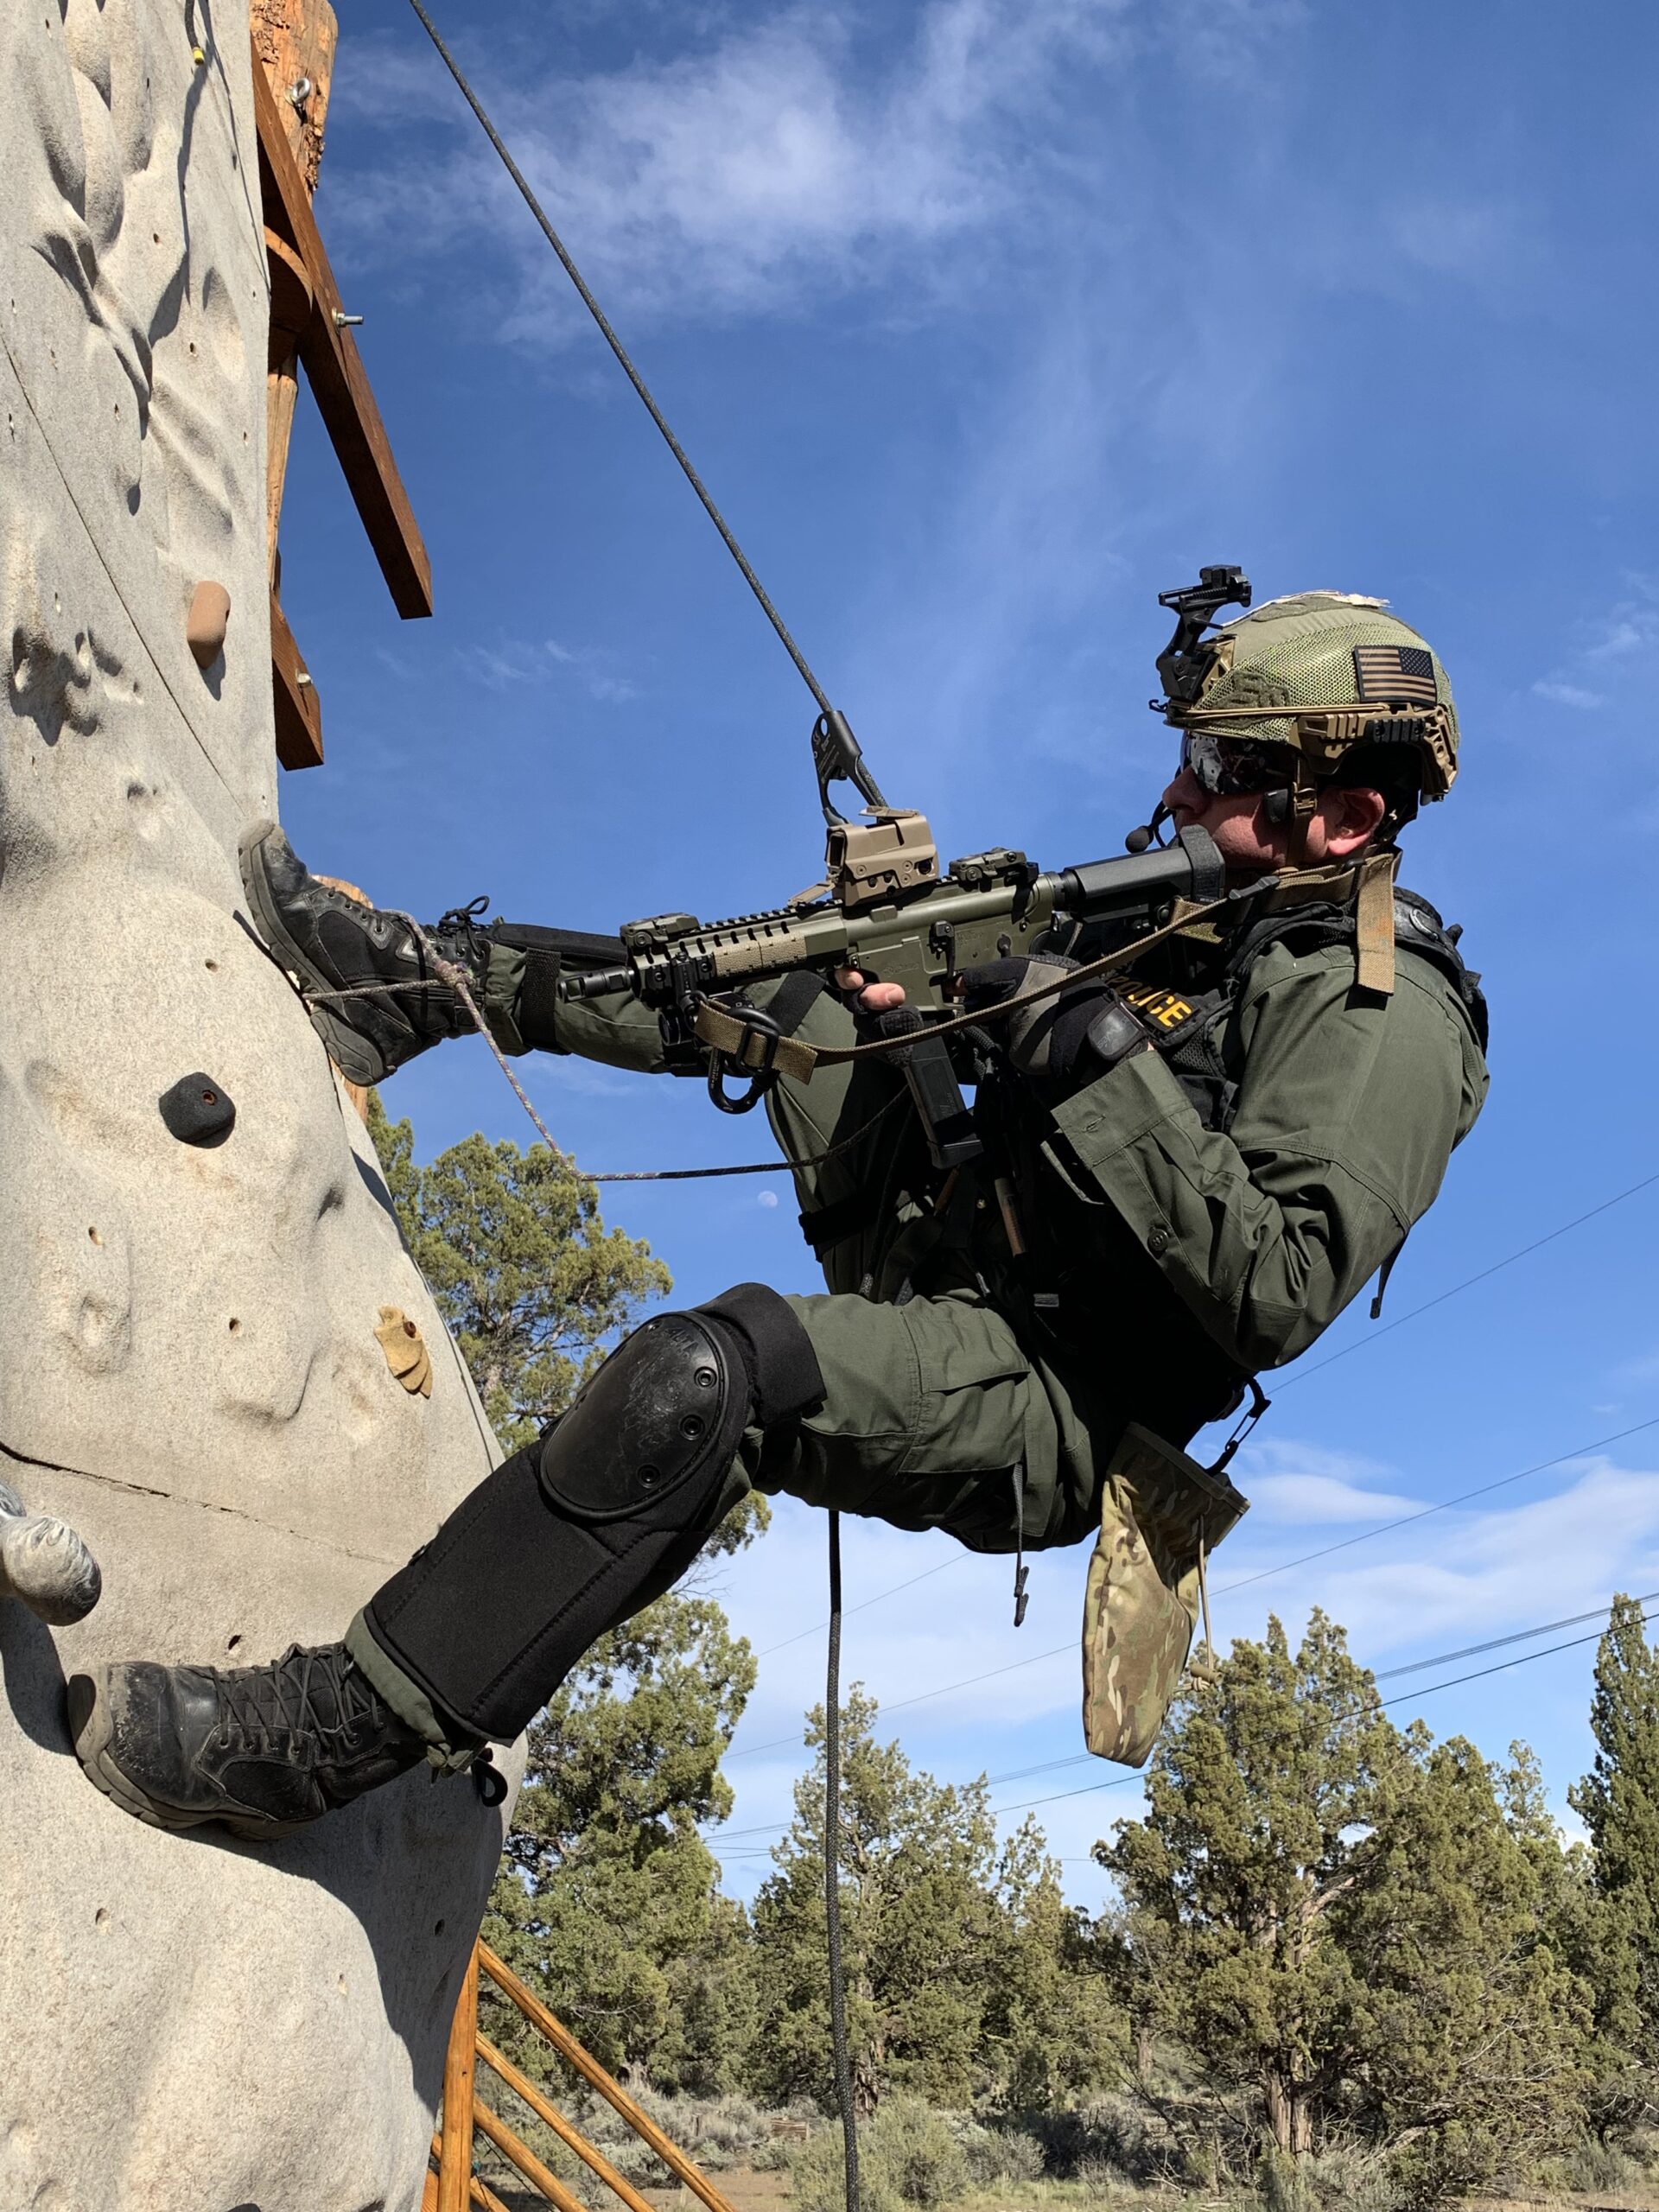 Tactical Rope Operations - Instructor Qualification Course 2022-04-26 -  Vertical, SRT, Rope, Rescue, Rappelling Tactical - Training Publications